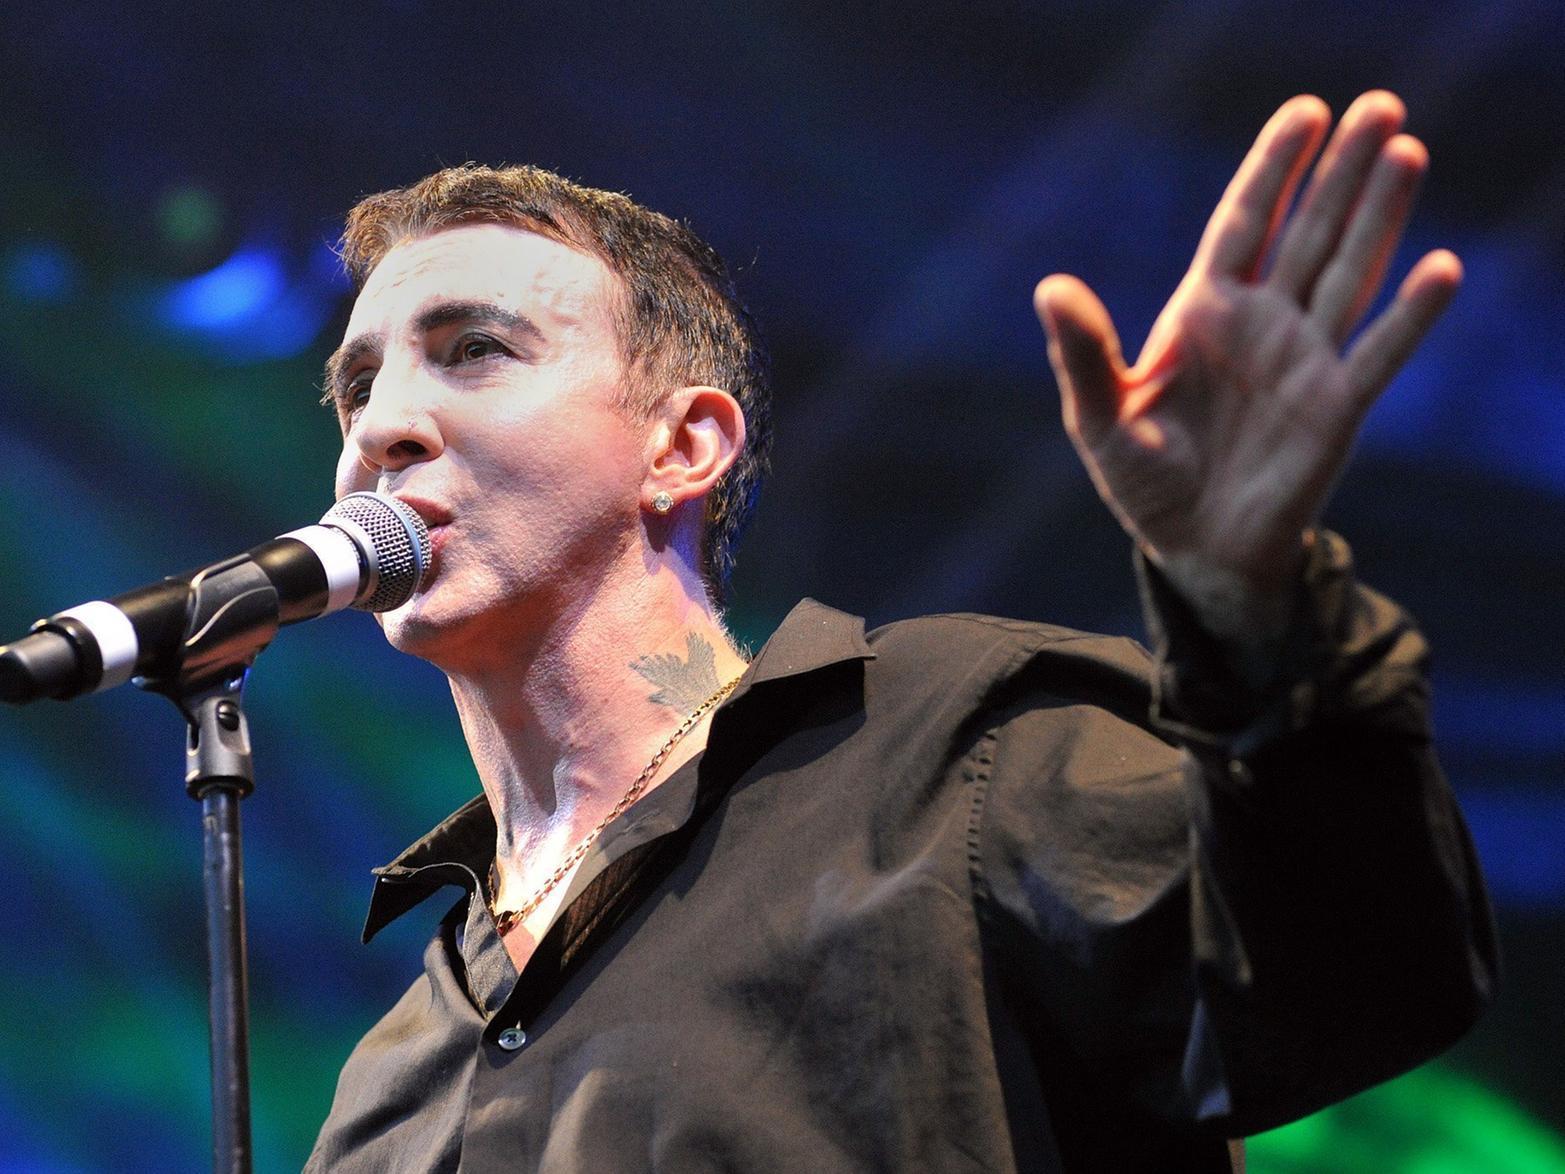 Soft Cells Marc Almond will be bringing some of the most popular synthpop tunes of the 1980s, including Tainted Love, which hit the number one spot in 17 different countries.